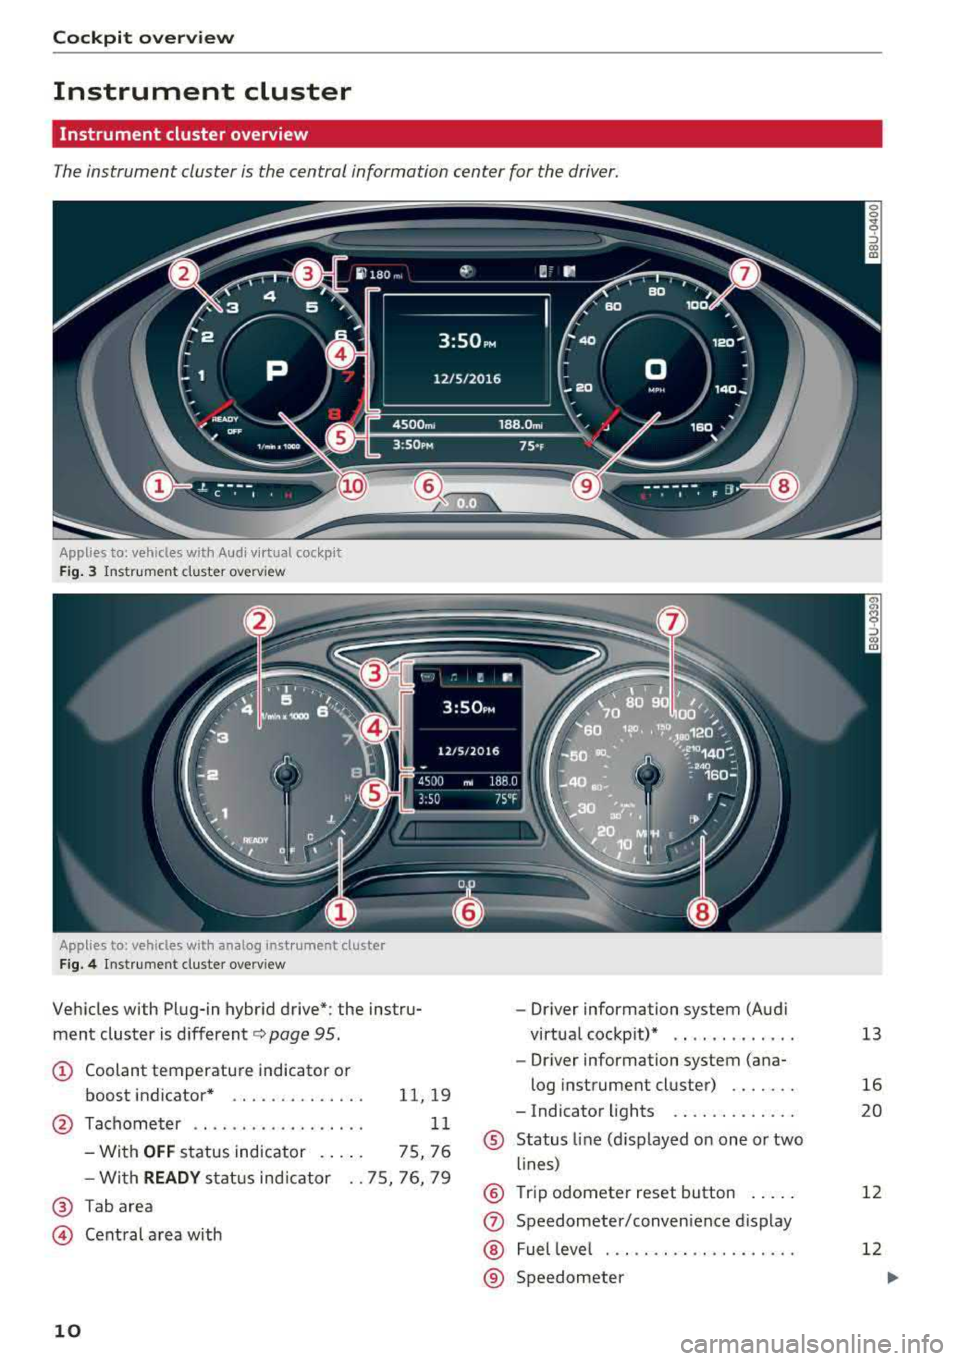 AUDI A3 SEDAN 2018  Owners Manual Cockpit  overview 
Instrument  cluster 
Instrument  cluster  overview 
The instrument  cluster  is the  central  information  center  for  the  driver. 
Applies  to : vehicles  wit h Aud i v ir tual  